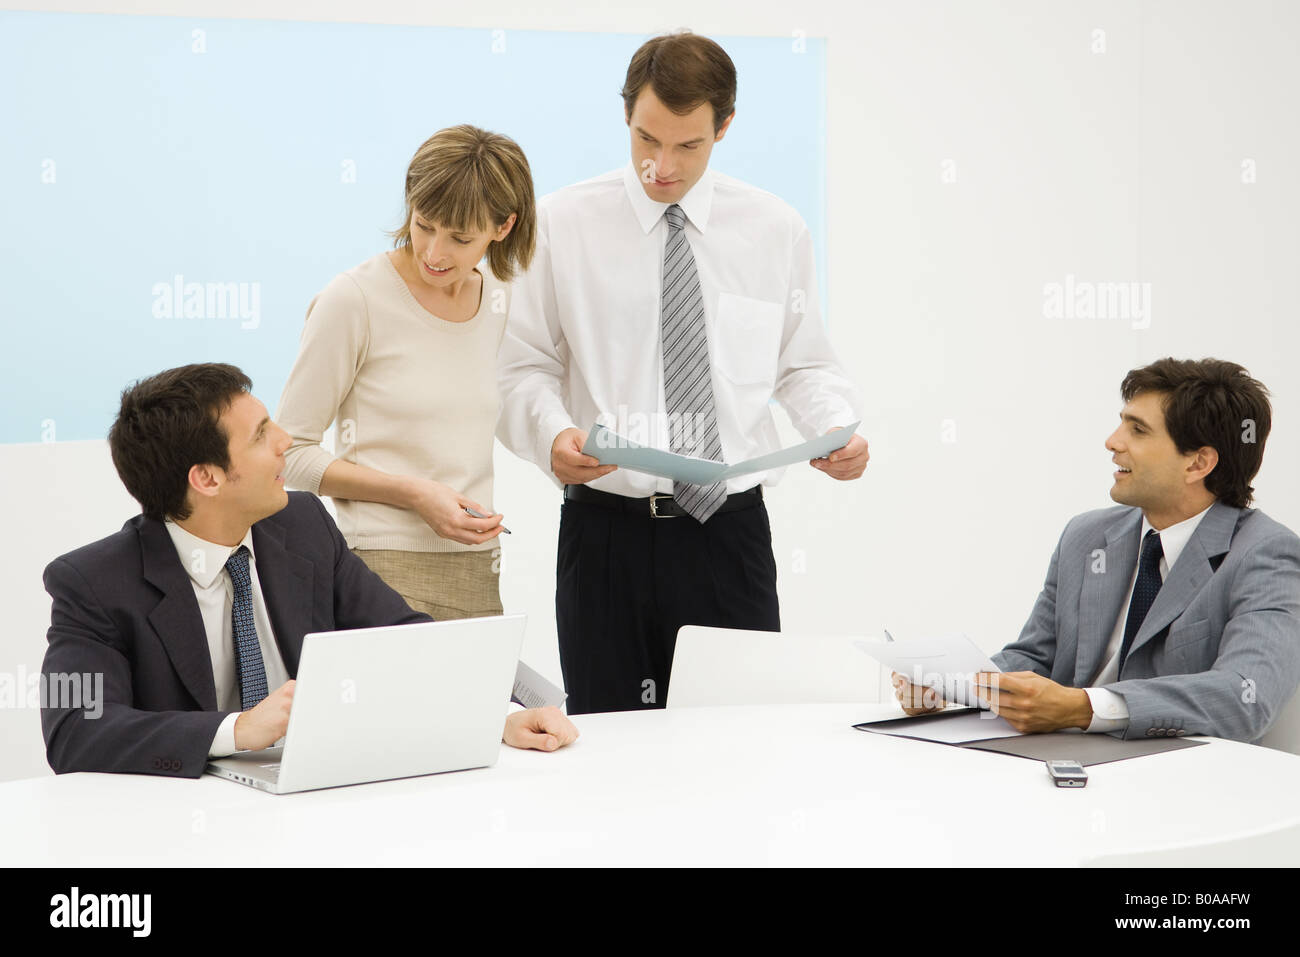 Business executives working together in office Stock Photo